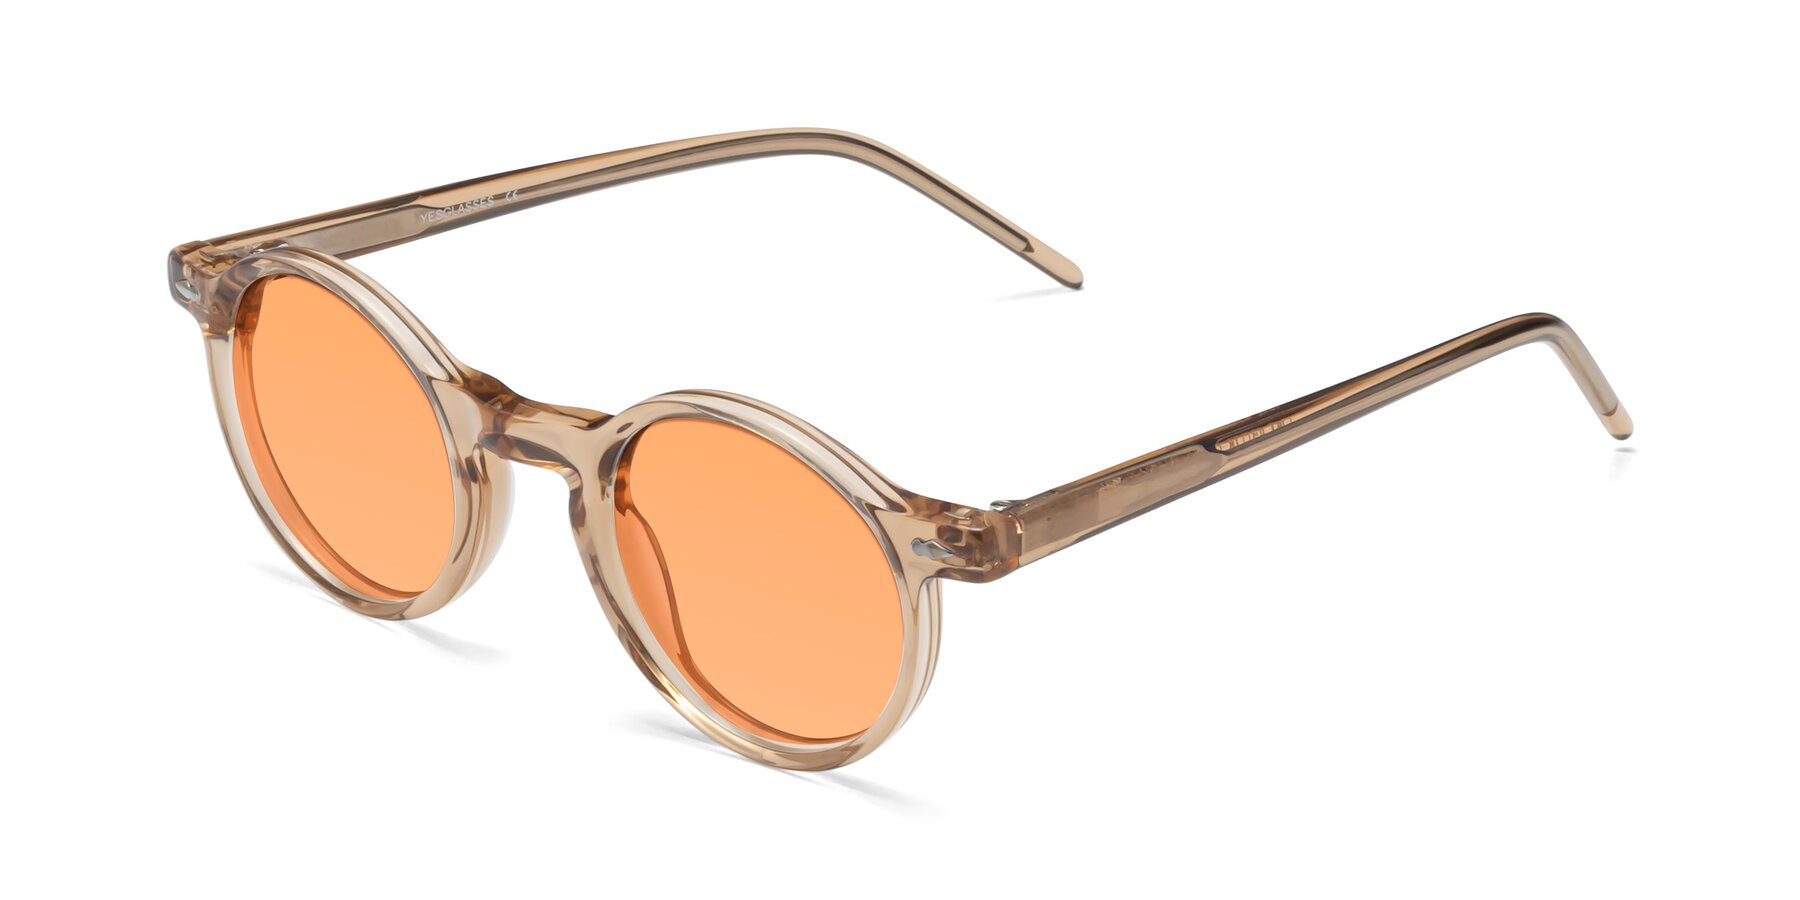 Angle of 1542 in Caramel with Medium Orange Tinted Lenses